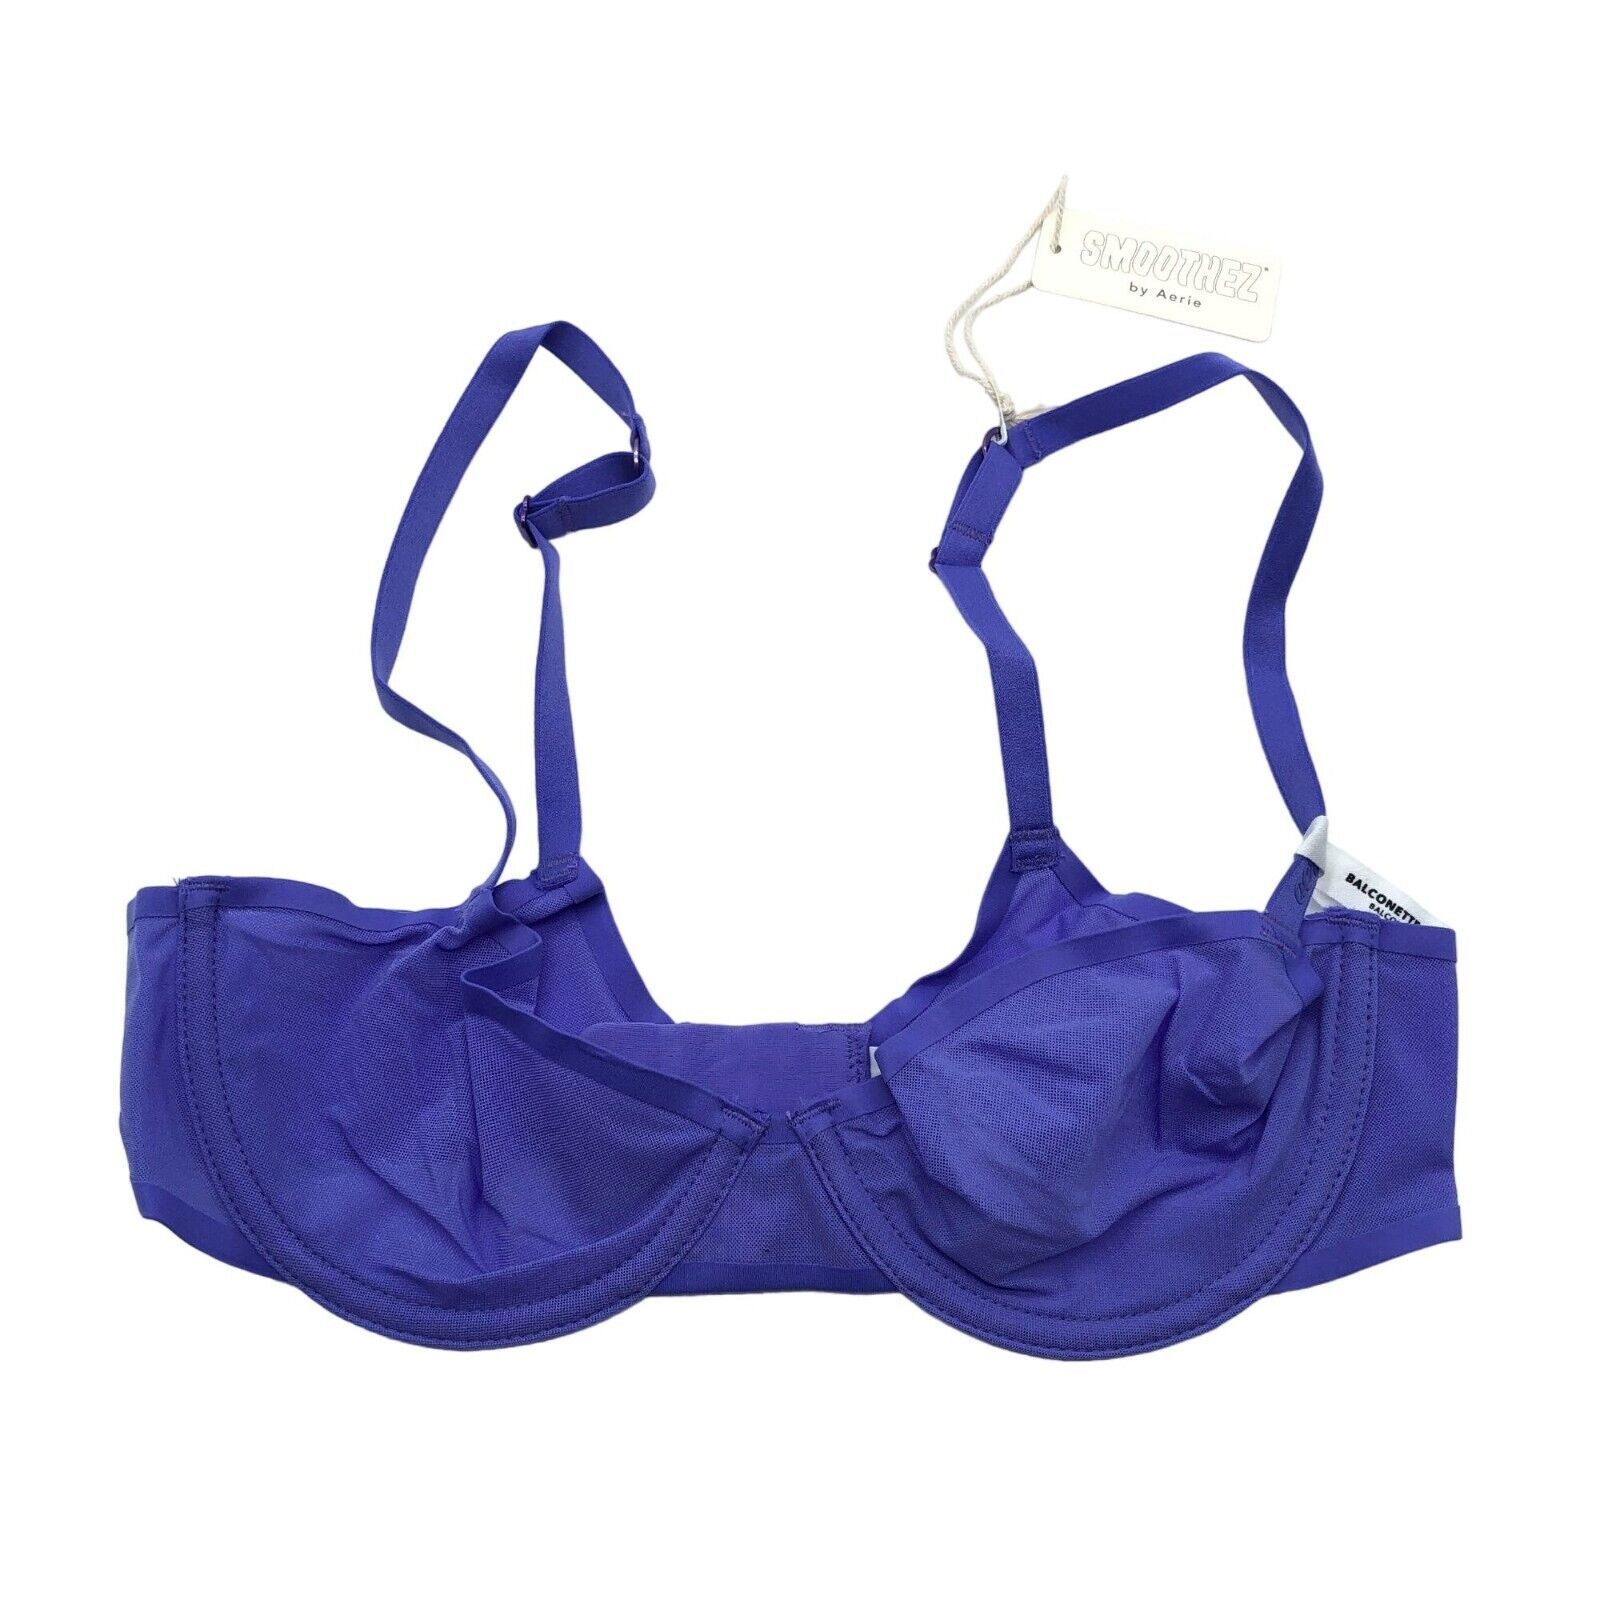 Primary image for Smoothez by Aerie Bra Balconette Sheer Mesh Unlined Underwire Purple 32D